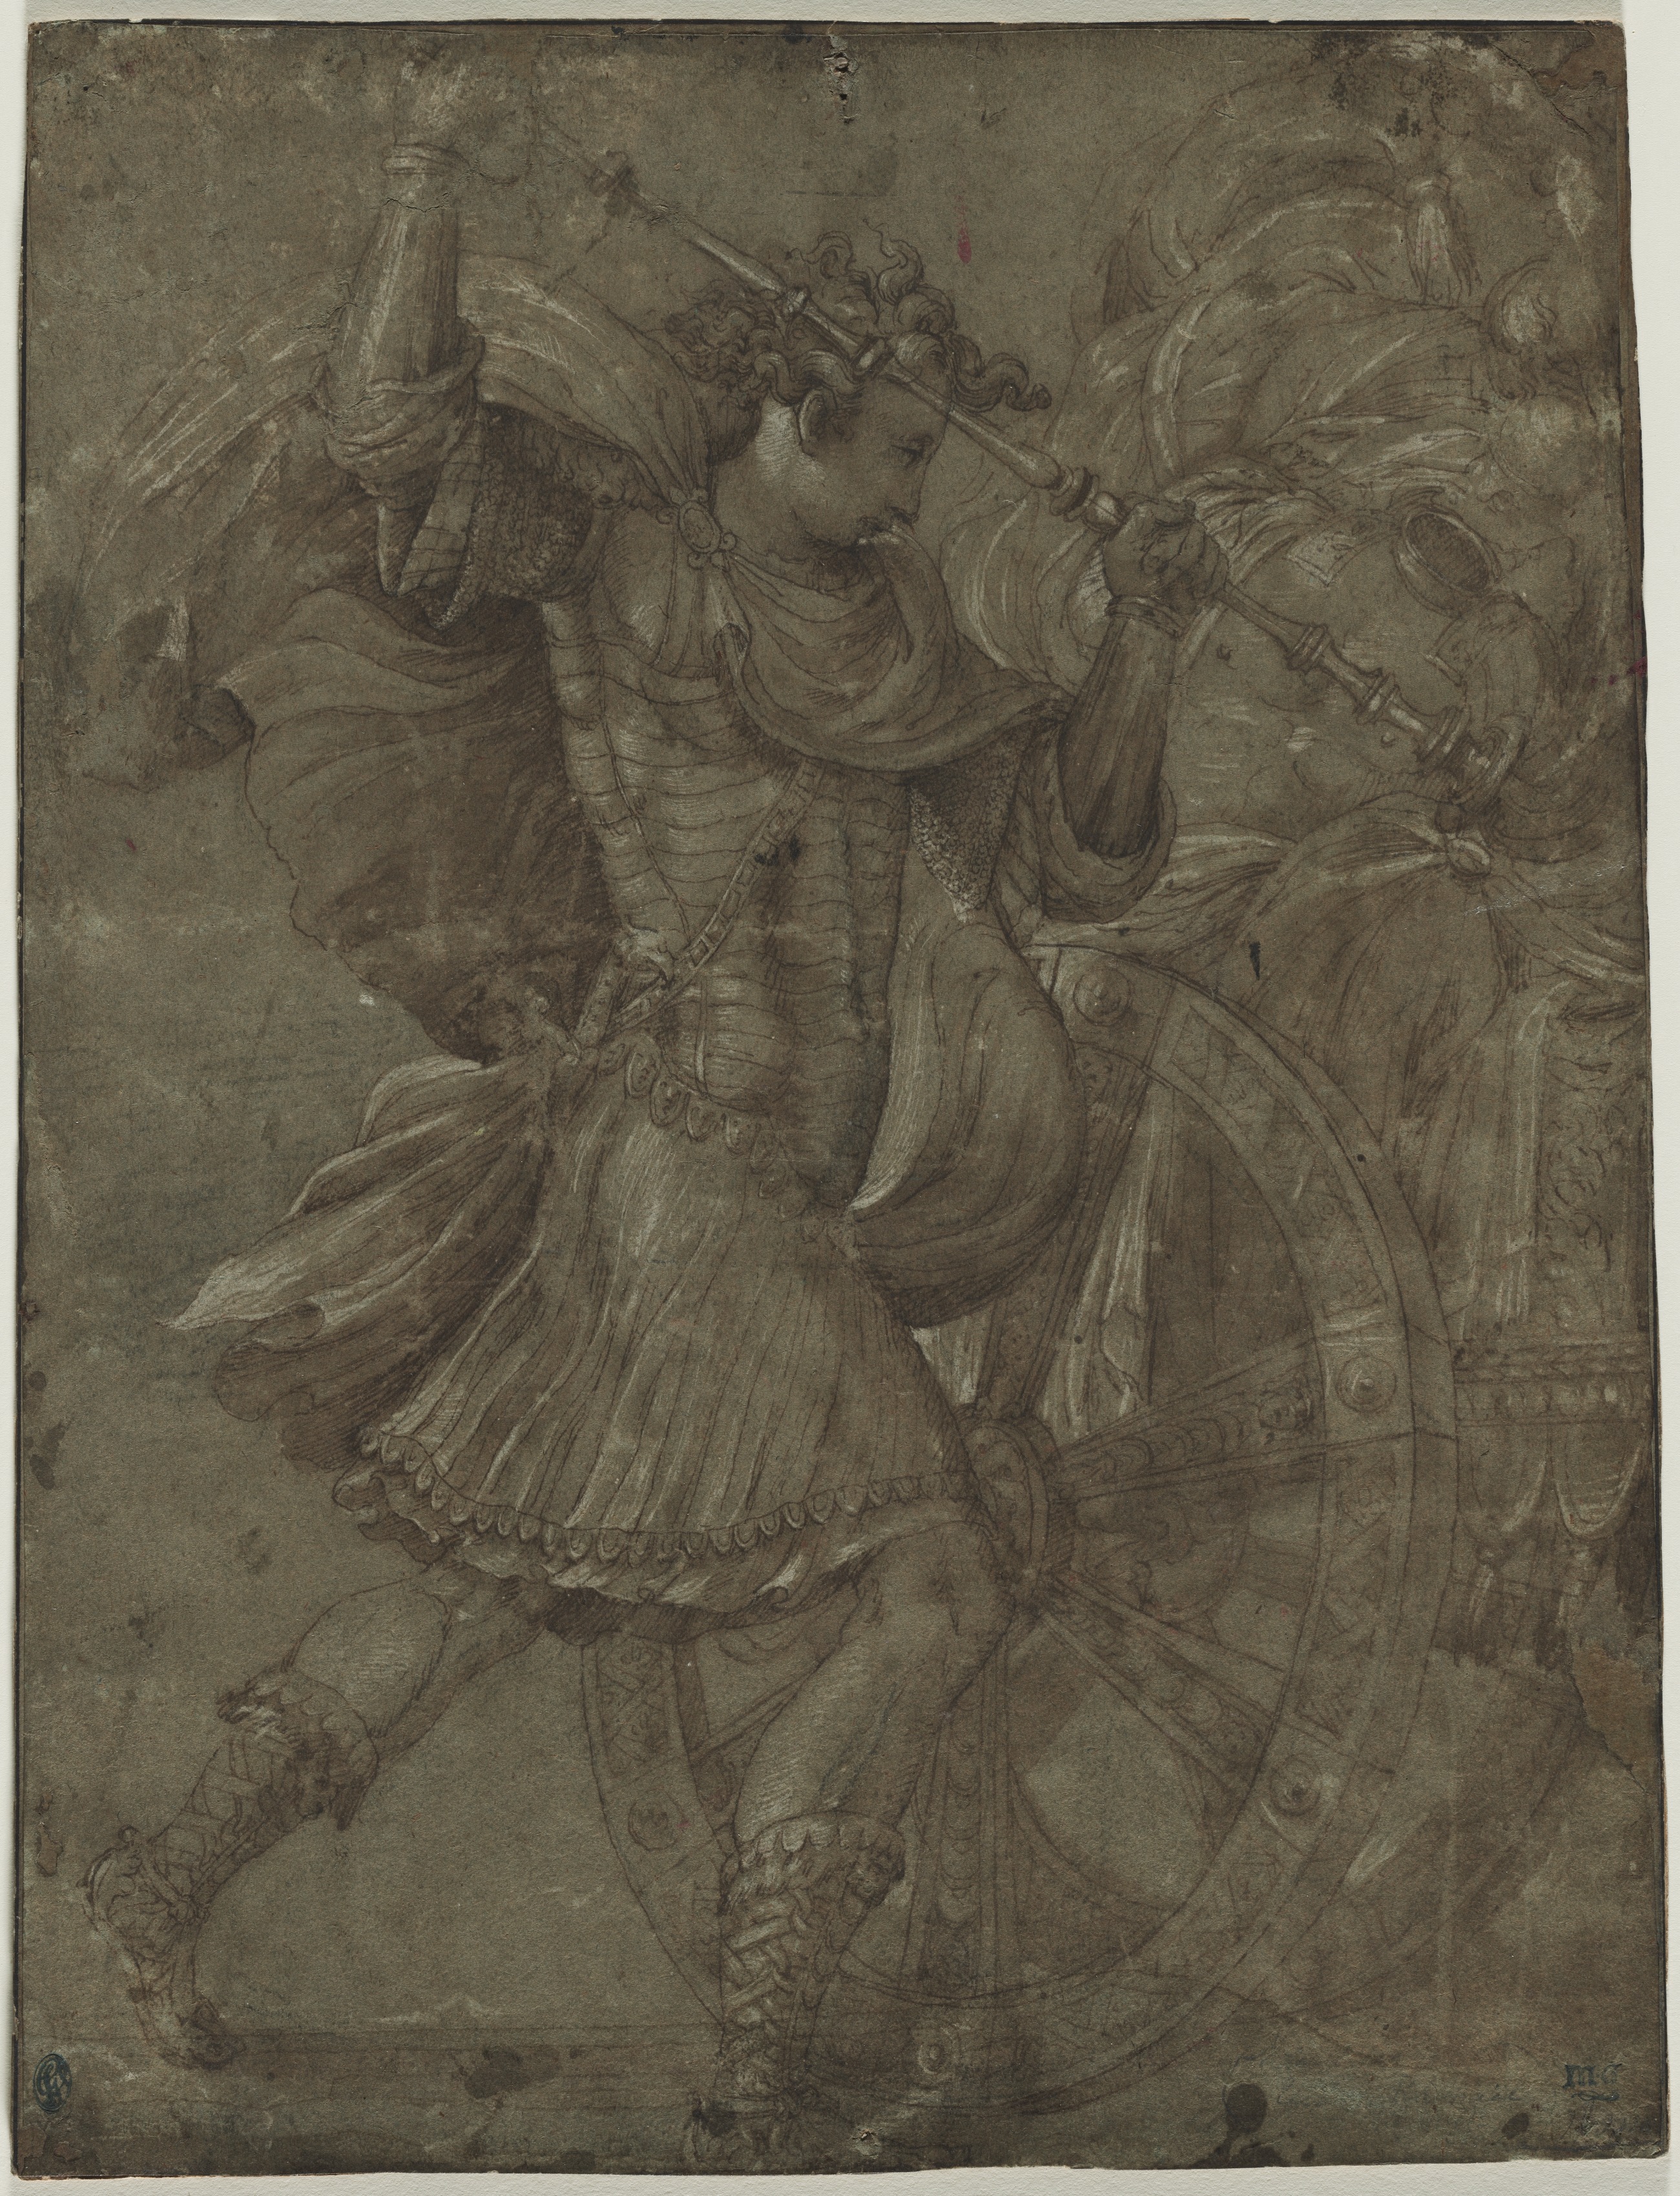 Man in Armor beside a Chariot